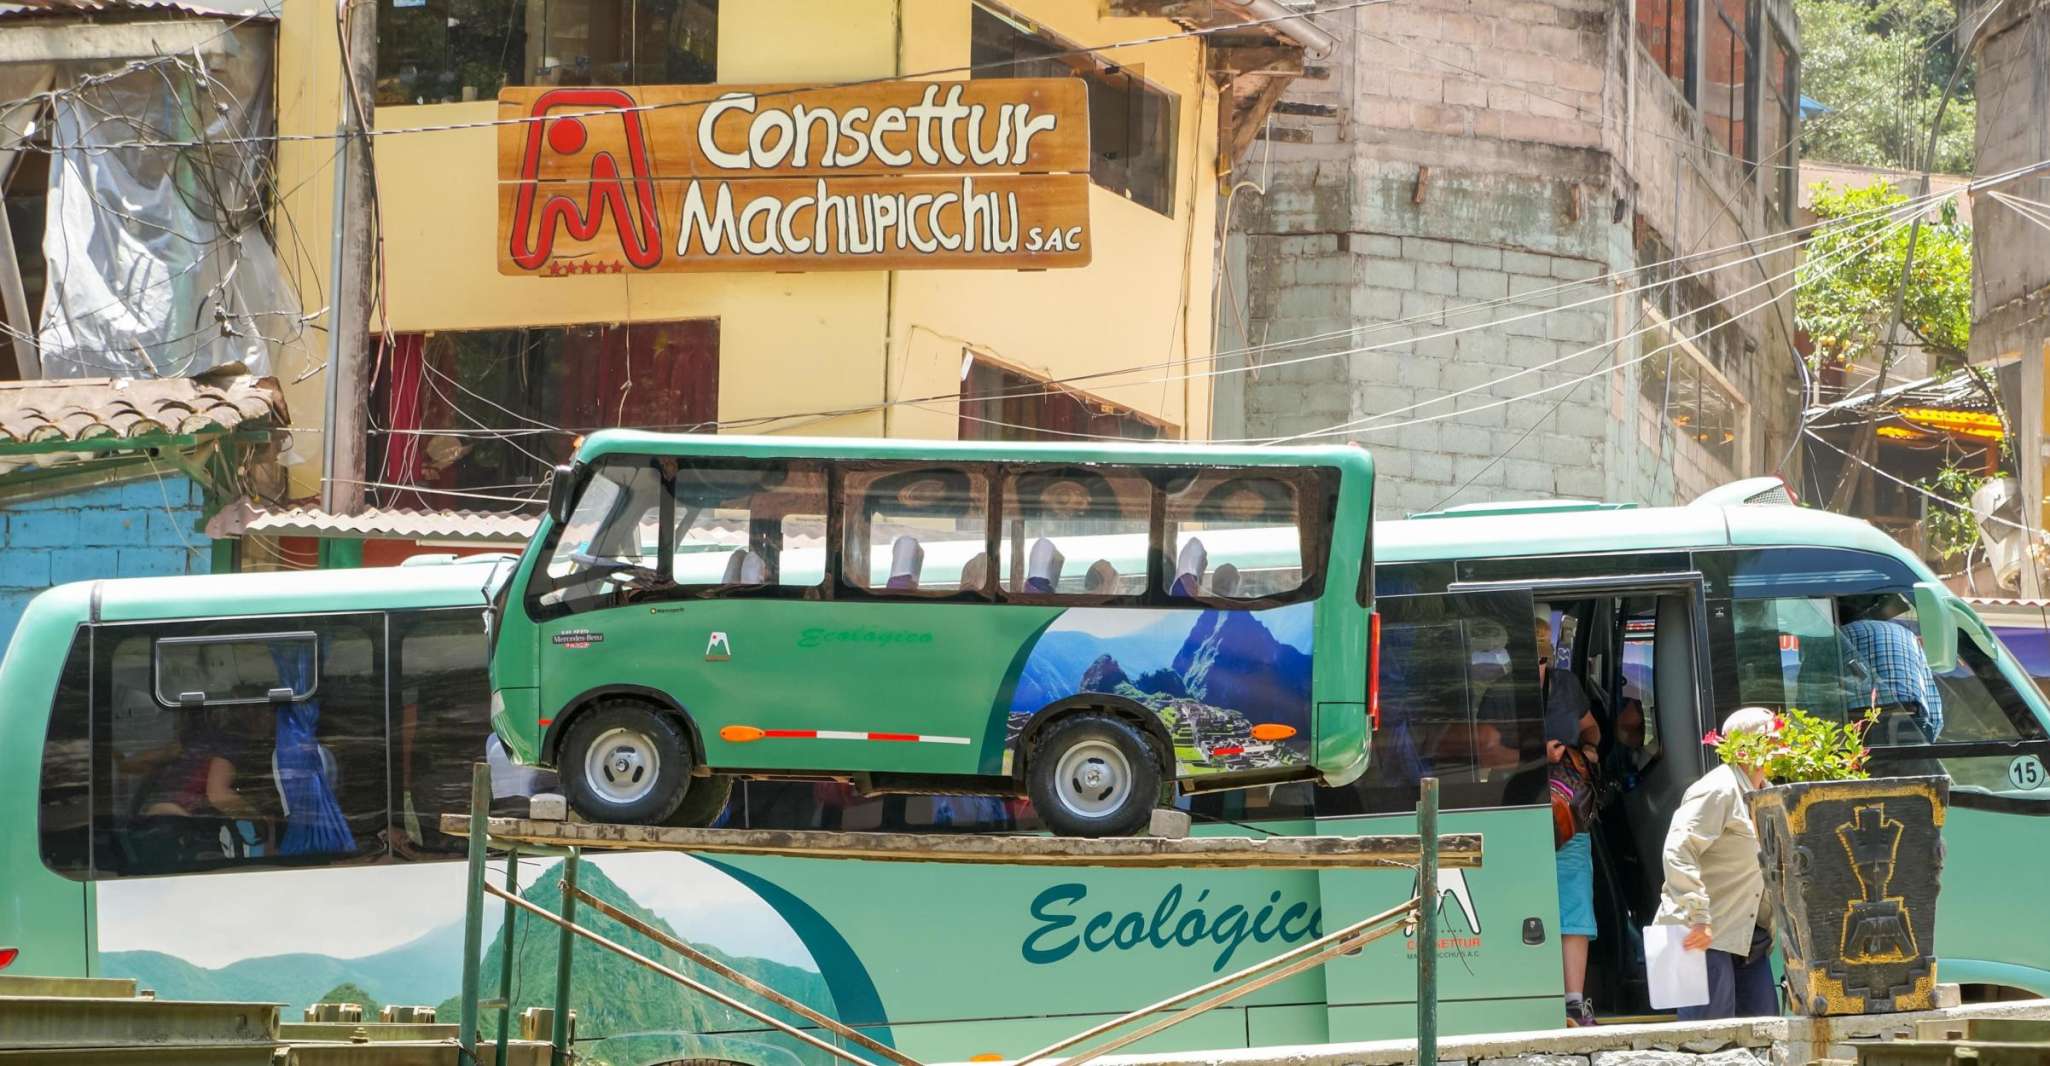 From Aguas Calientes, Round-Trip Bus Ticket to Machu Picchu - Housity